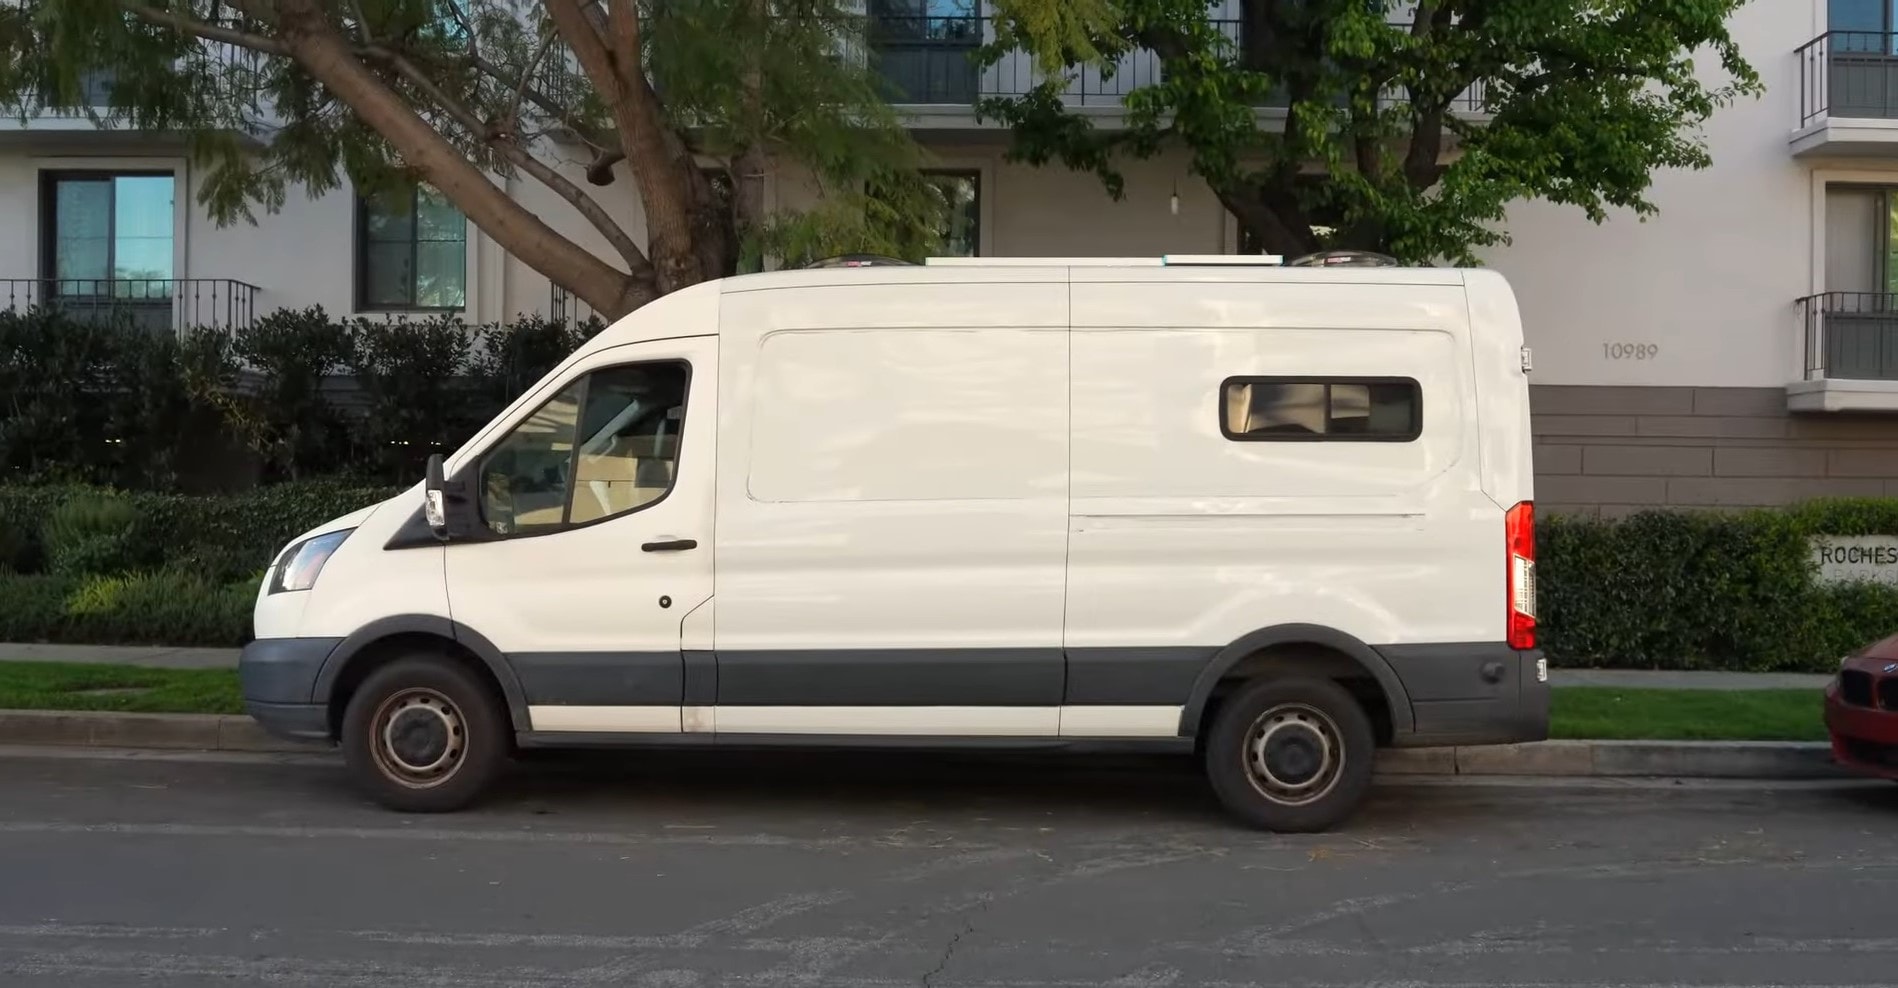 2015 Ford Transit converted into a minimalist dormitory on wheels